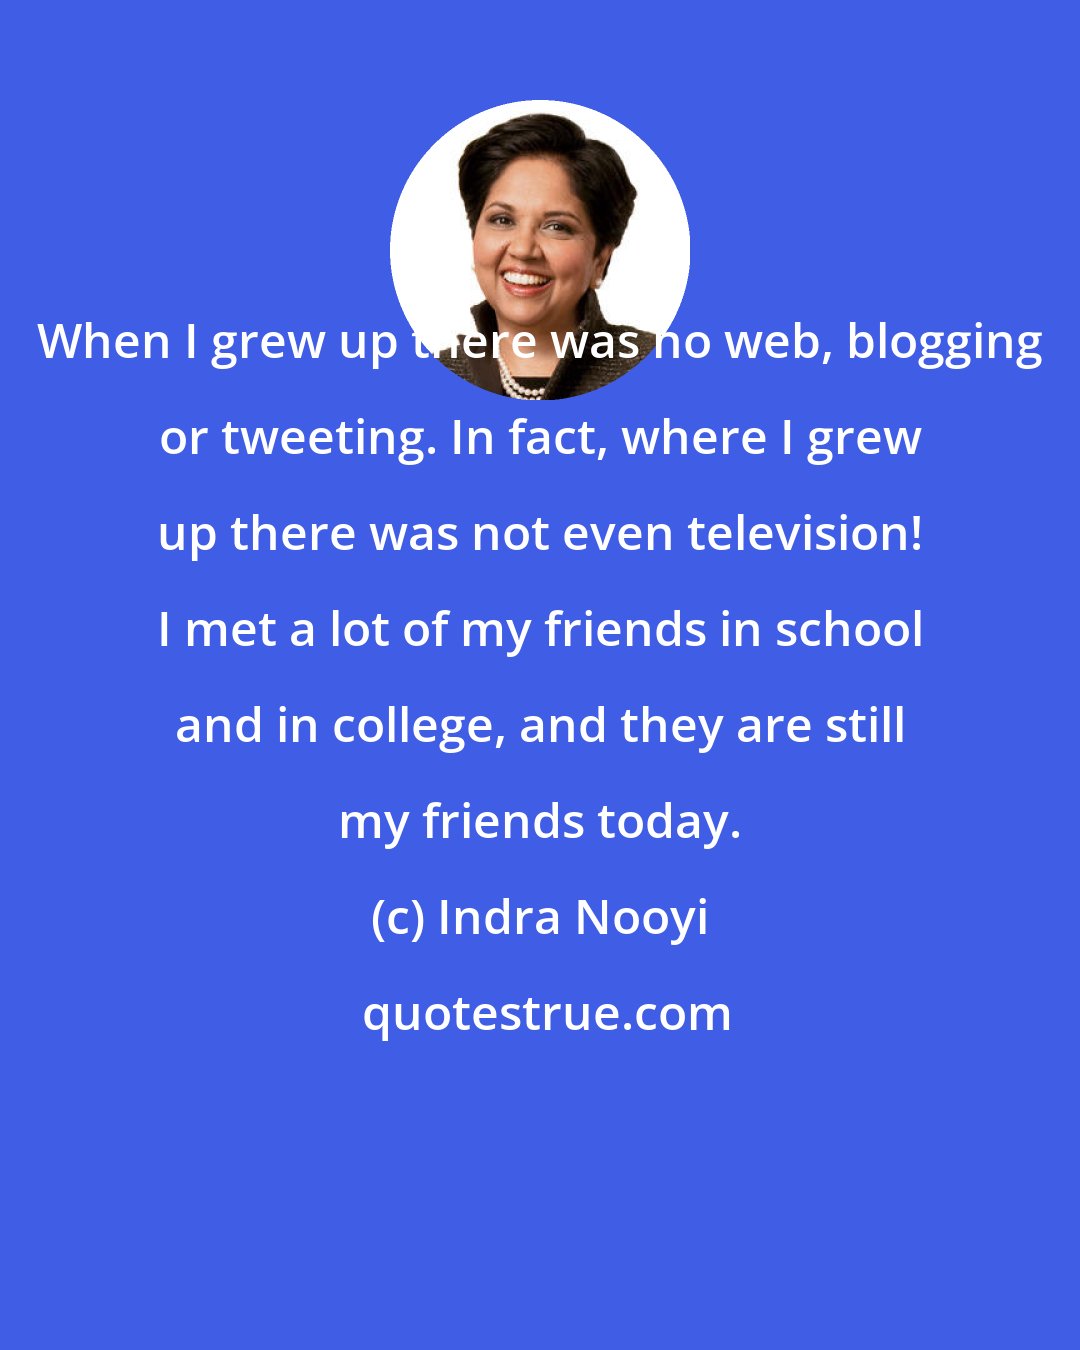 Indra Nooyi: When I grew up there was no web, blogging or tweeting. In fact, where I grew up there was not even television! I met a lot of my friends in school and in college, and they are still my friends today.